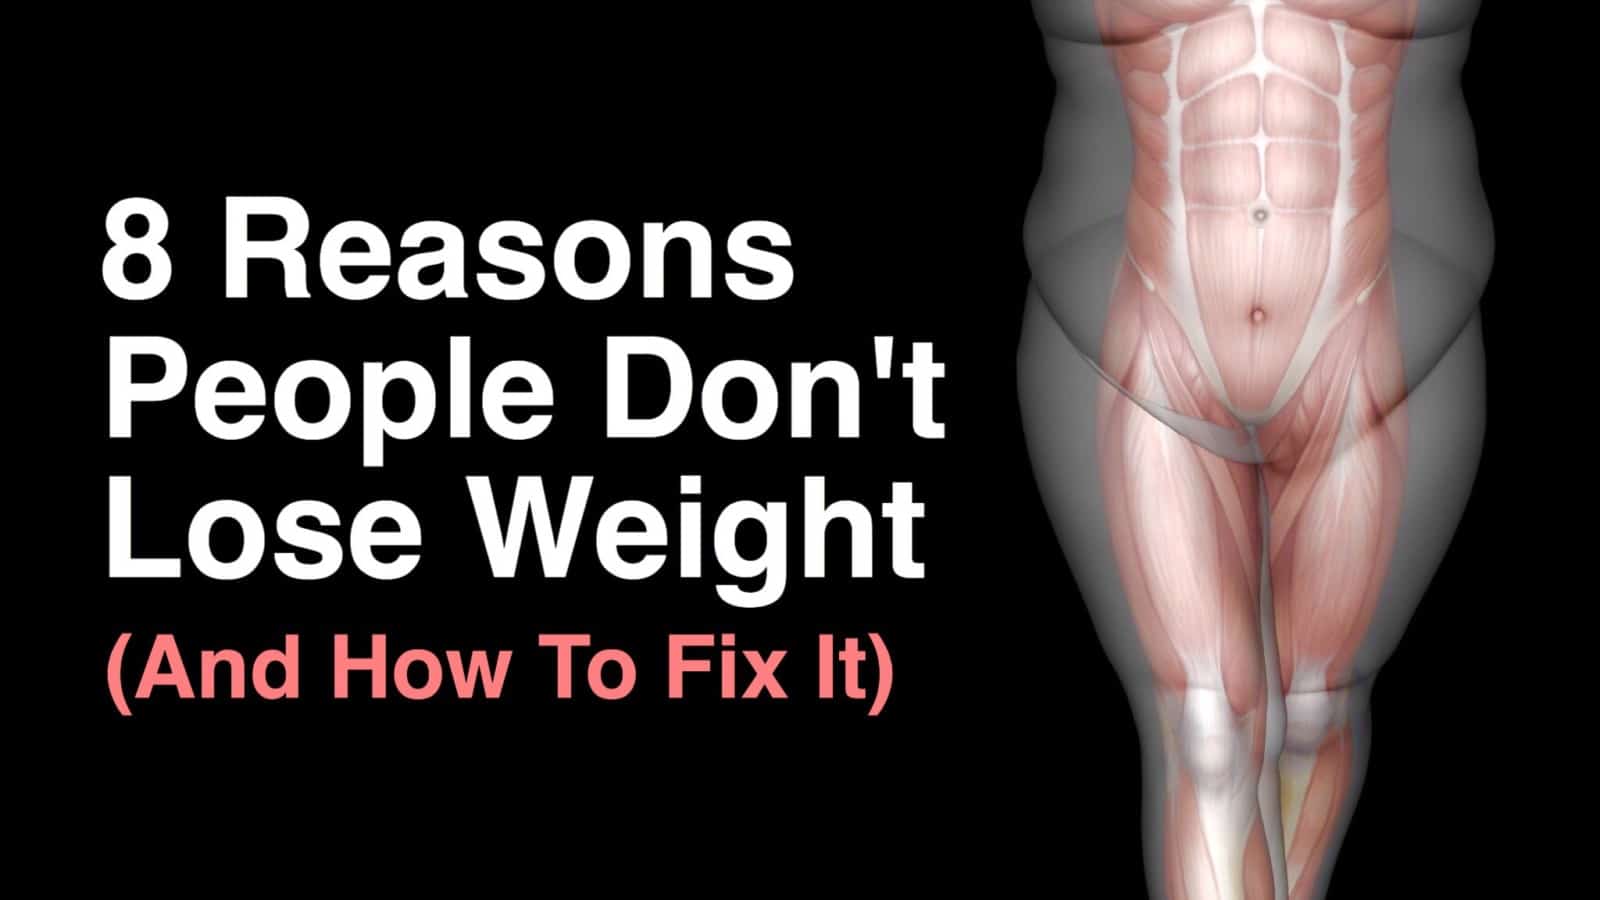 8 Reasons People Don’t Lose Weight (And How To Fix It)